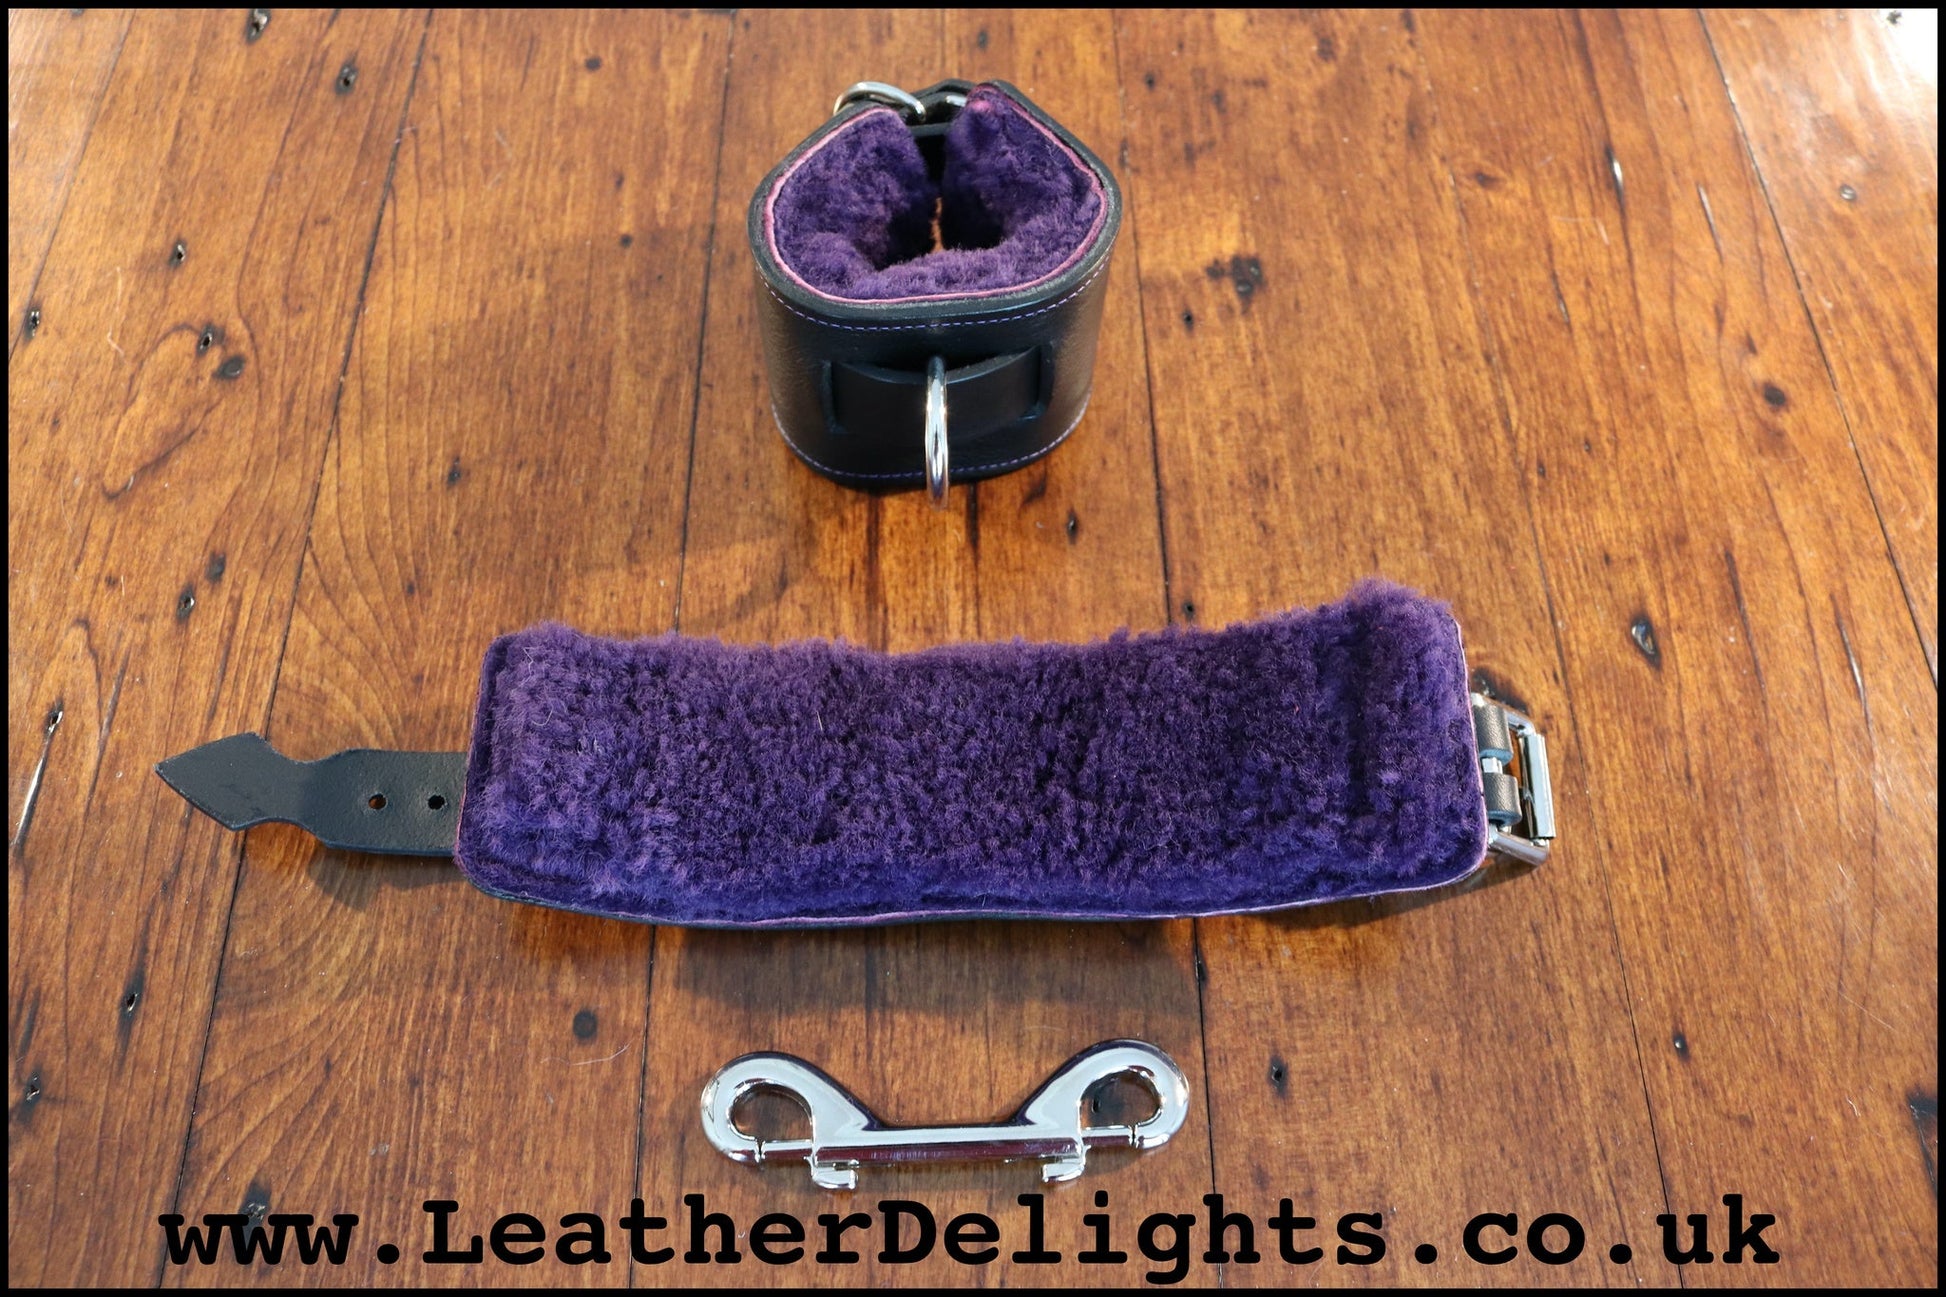 Black Wrist Cuffs with Sheepskin Lining - Leather Delights